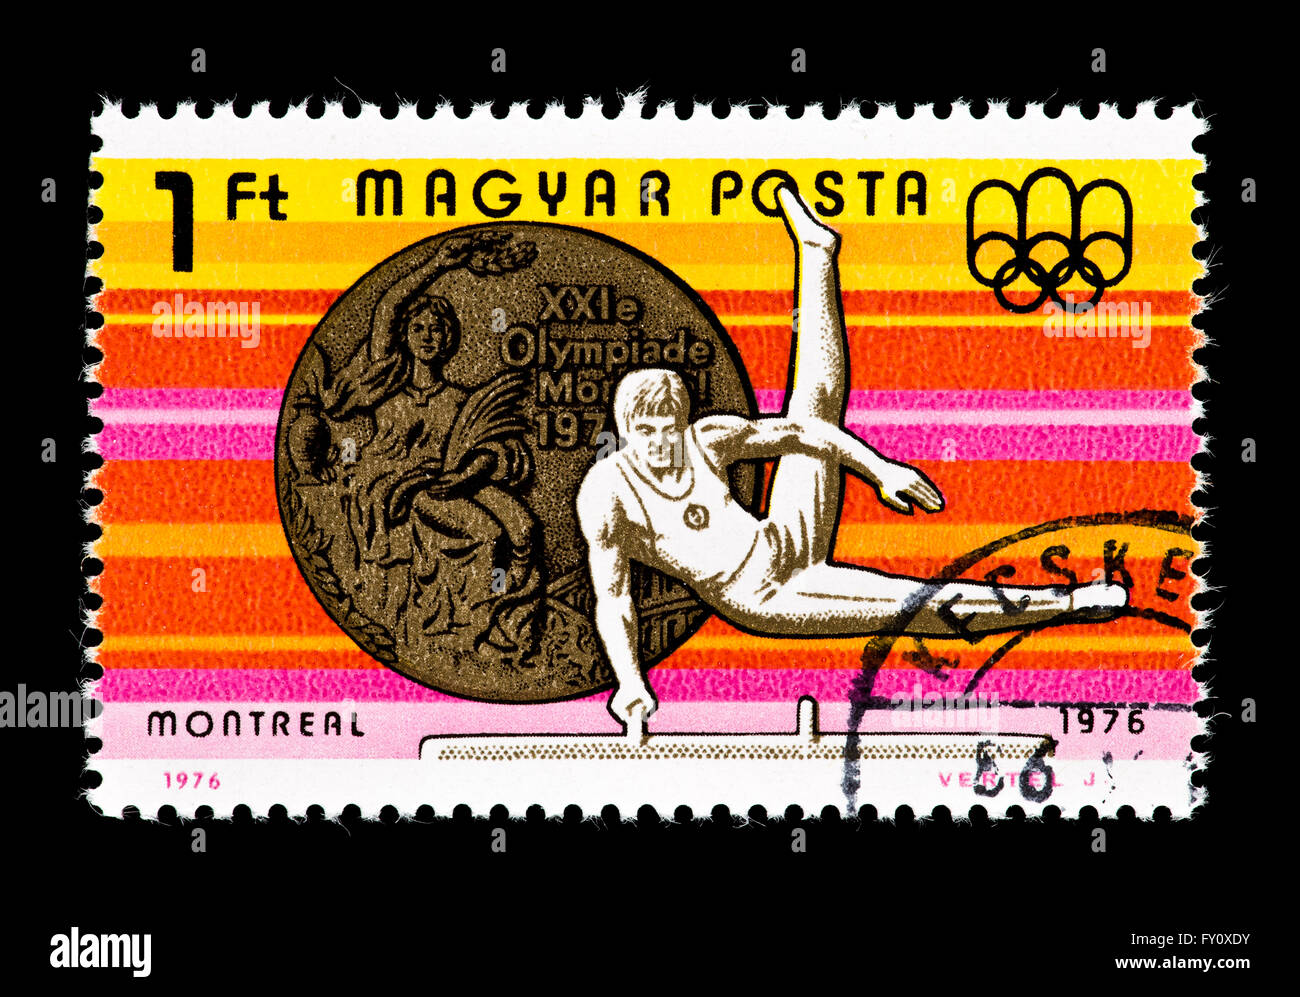 Postage stamp from Hungary depicting a gymnast on the pommel horse, issued for the 1976 Olympic Games in Montreal. Stock Photo